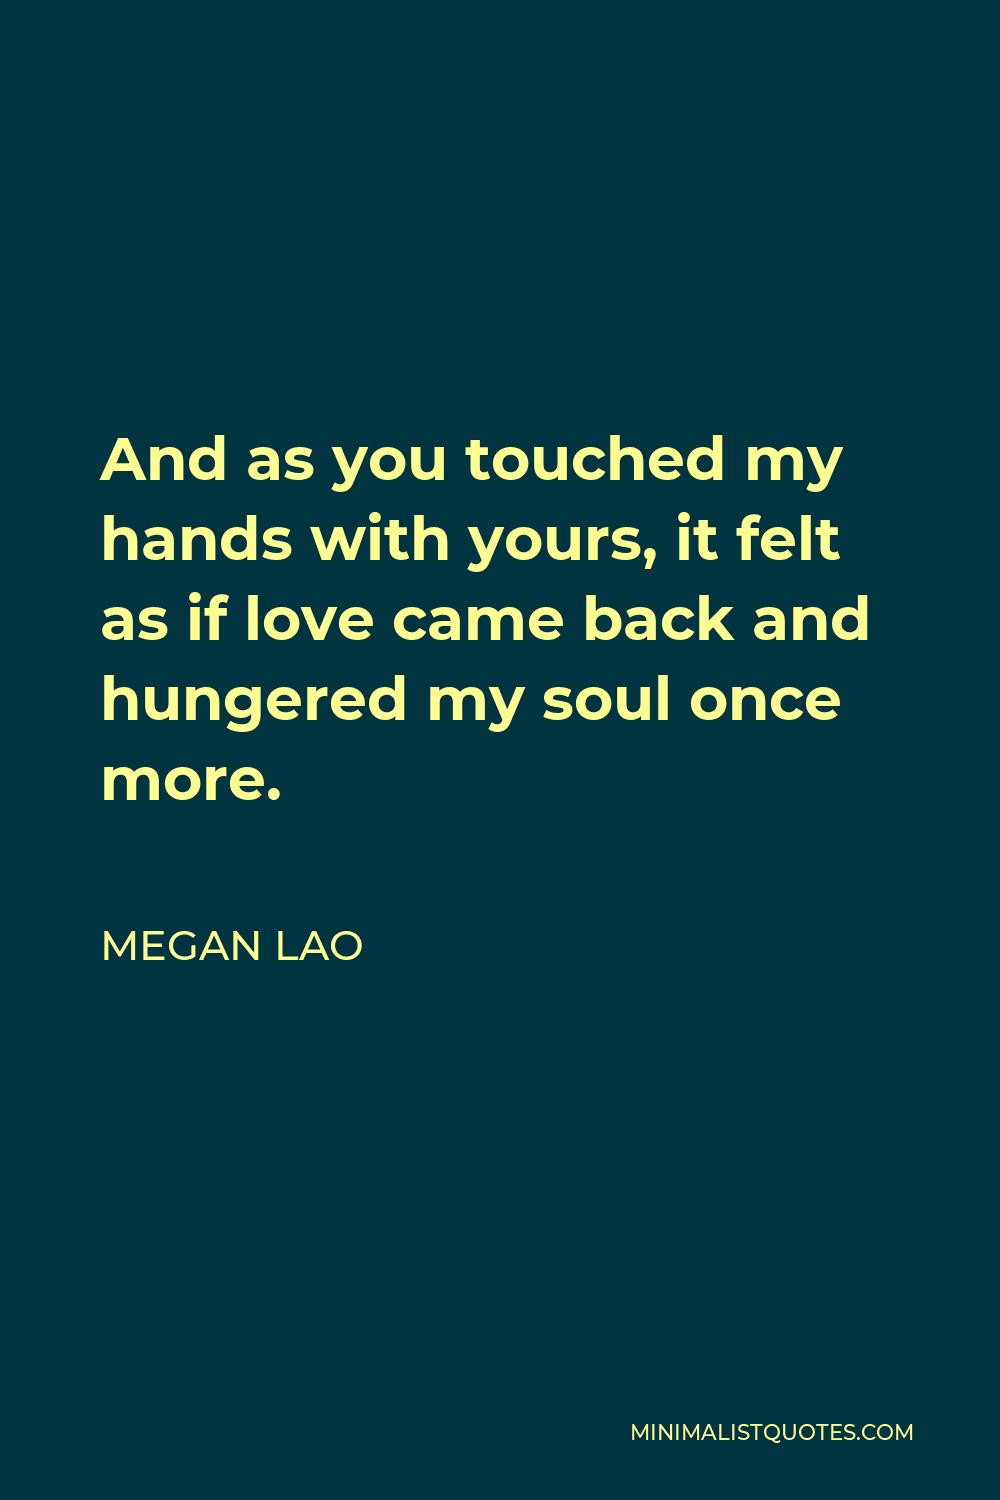 Megan Lao Quote - And as you touched my hands with yours, it felt as if love came back and hungered my soul once more.